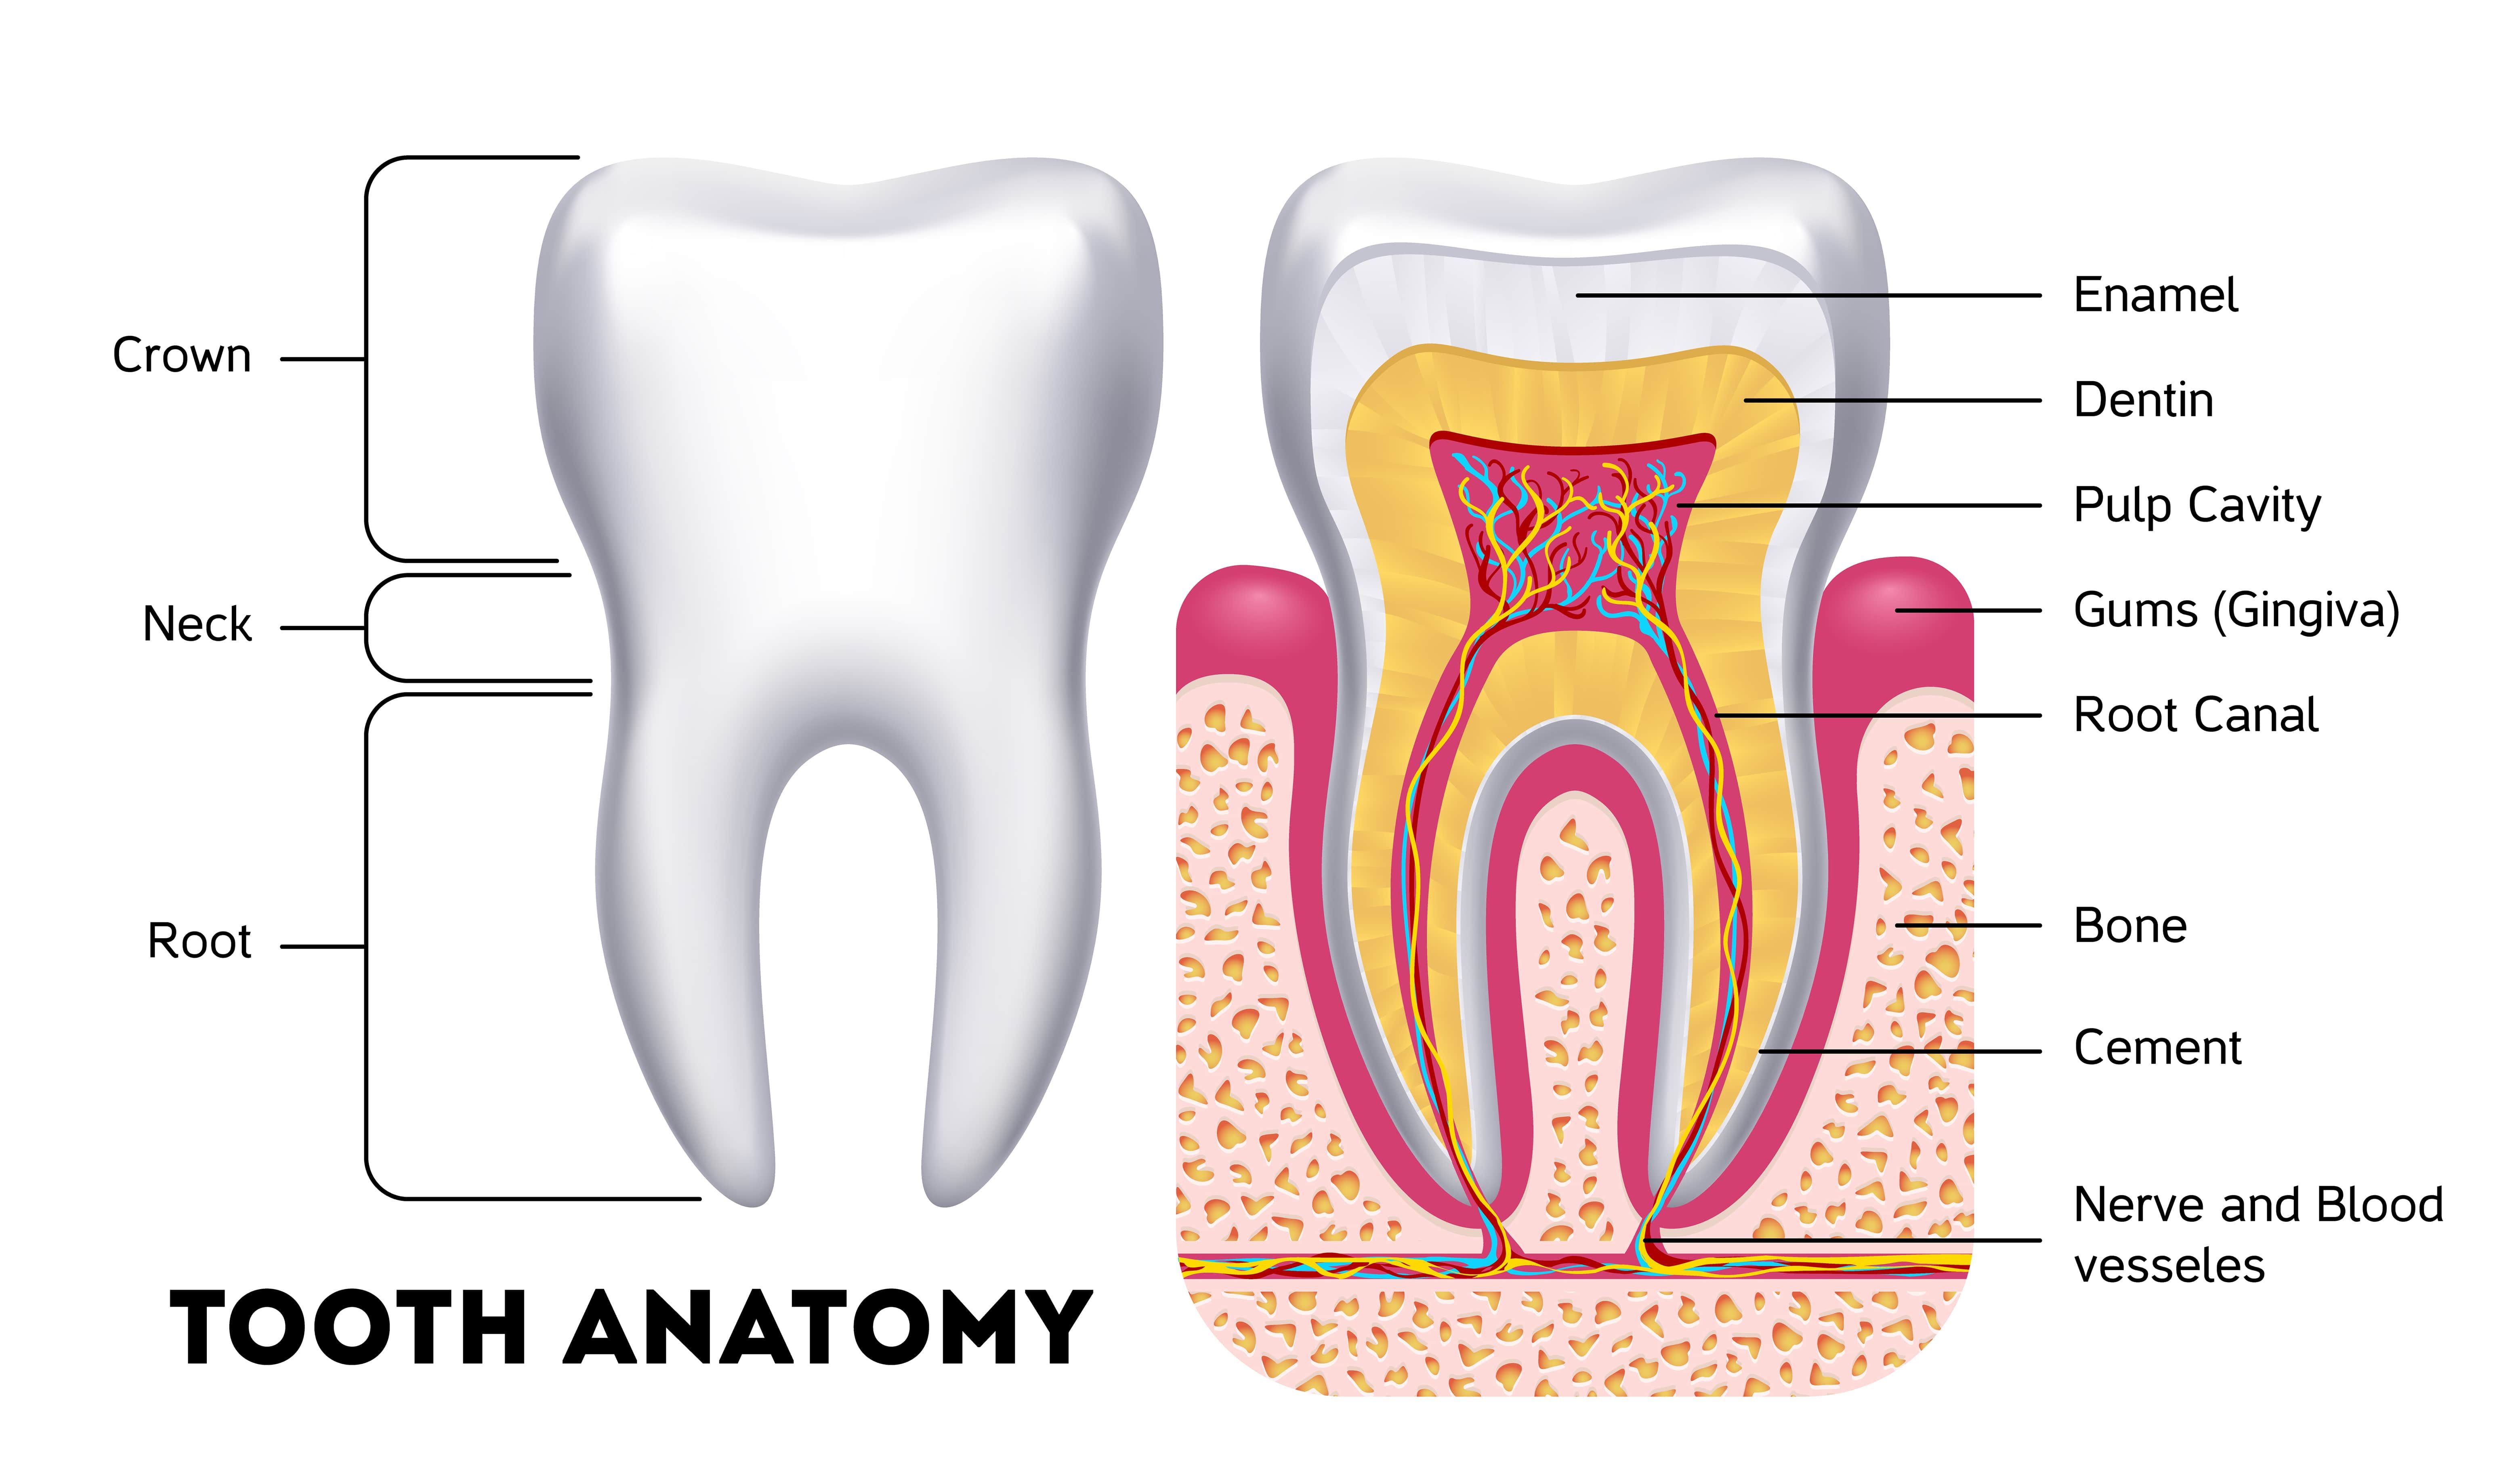 Anatomy Of The Teeth Anatomical Chart Poster Prints | Images and Photos ...